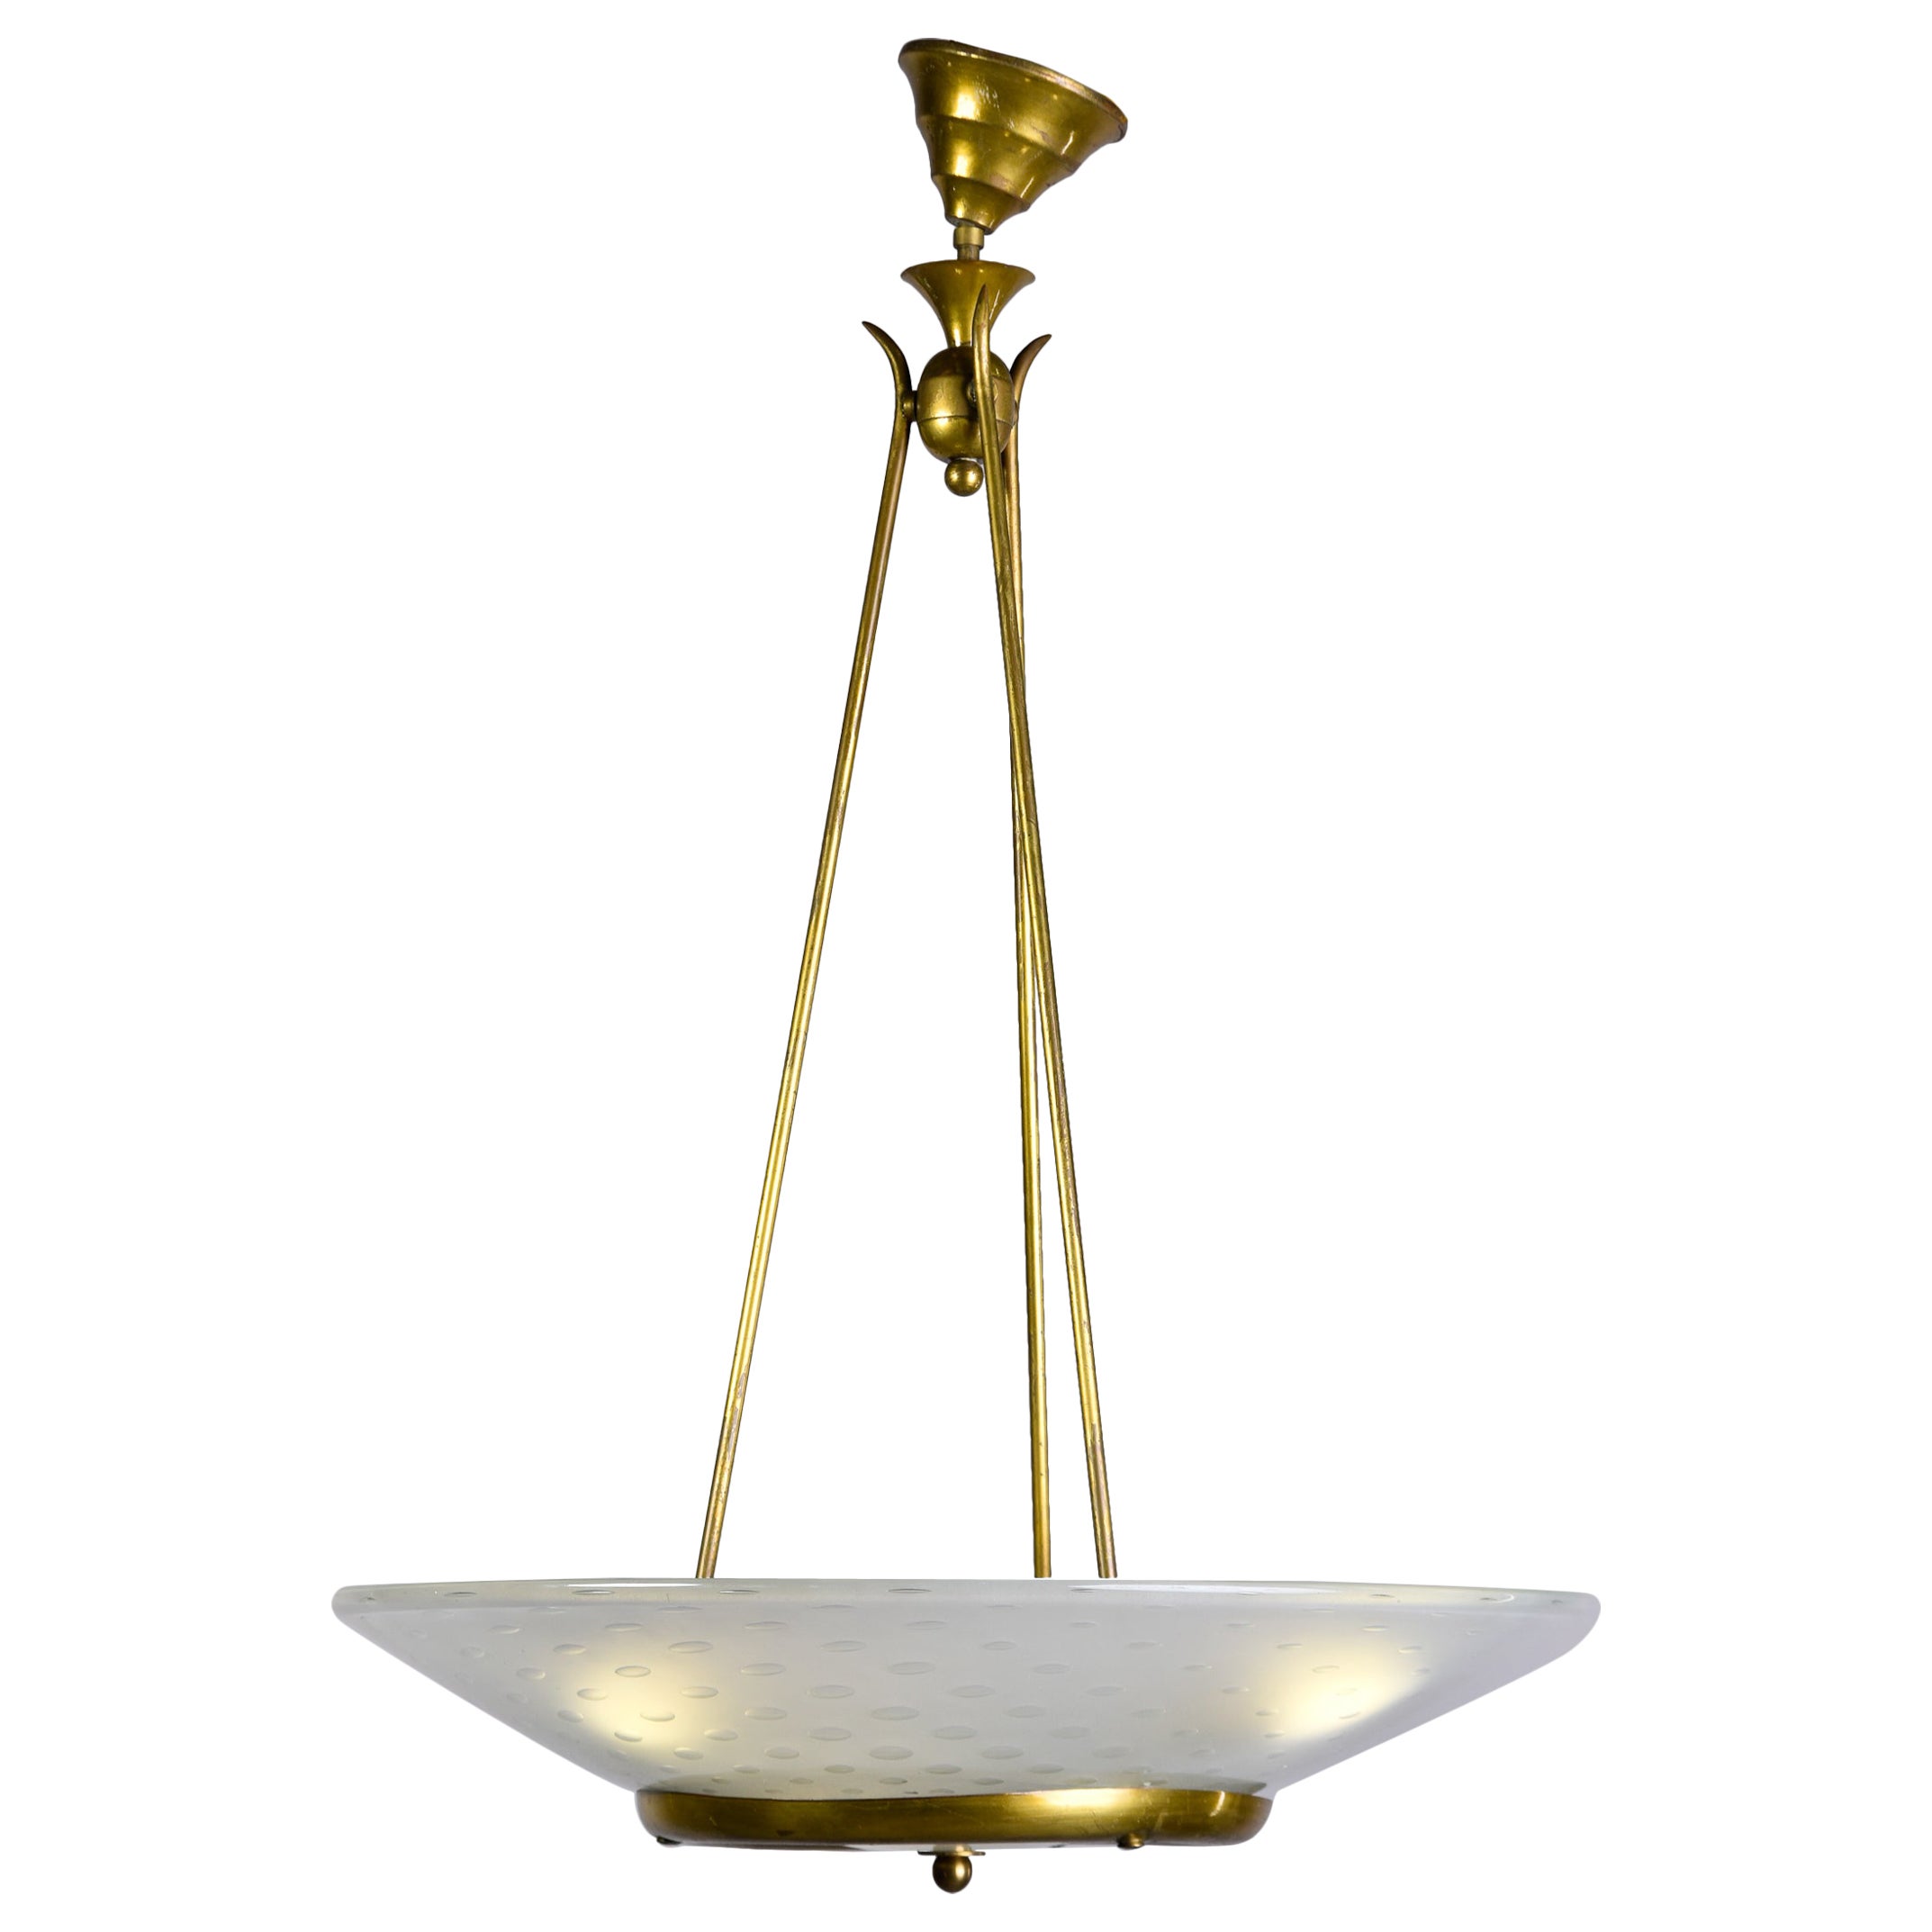 New Three Light Vecchio Chandelier in Brass with Murano Bubble Glass Shade For Sale